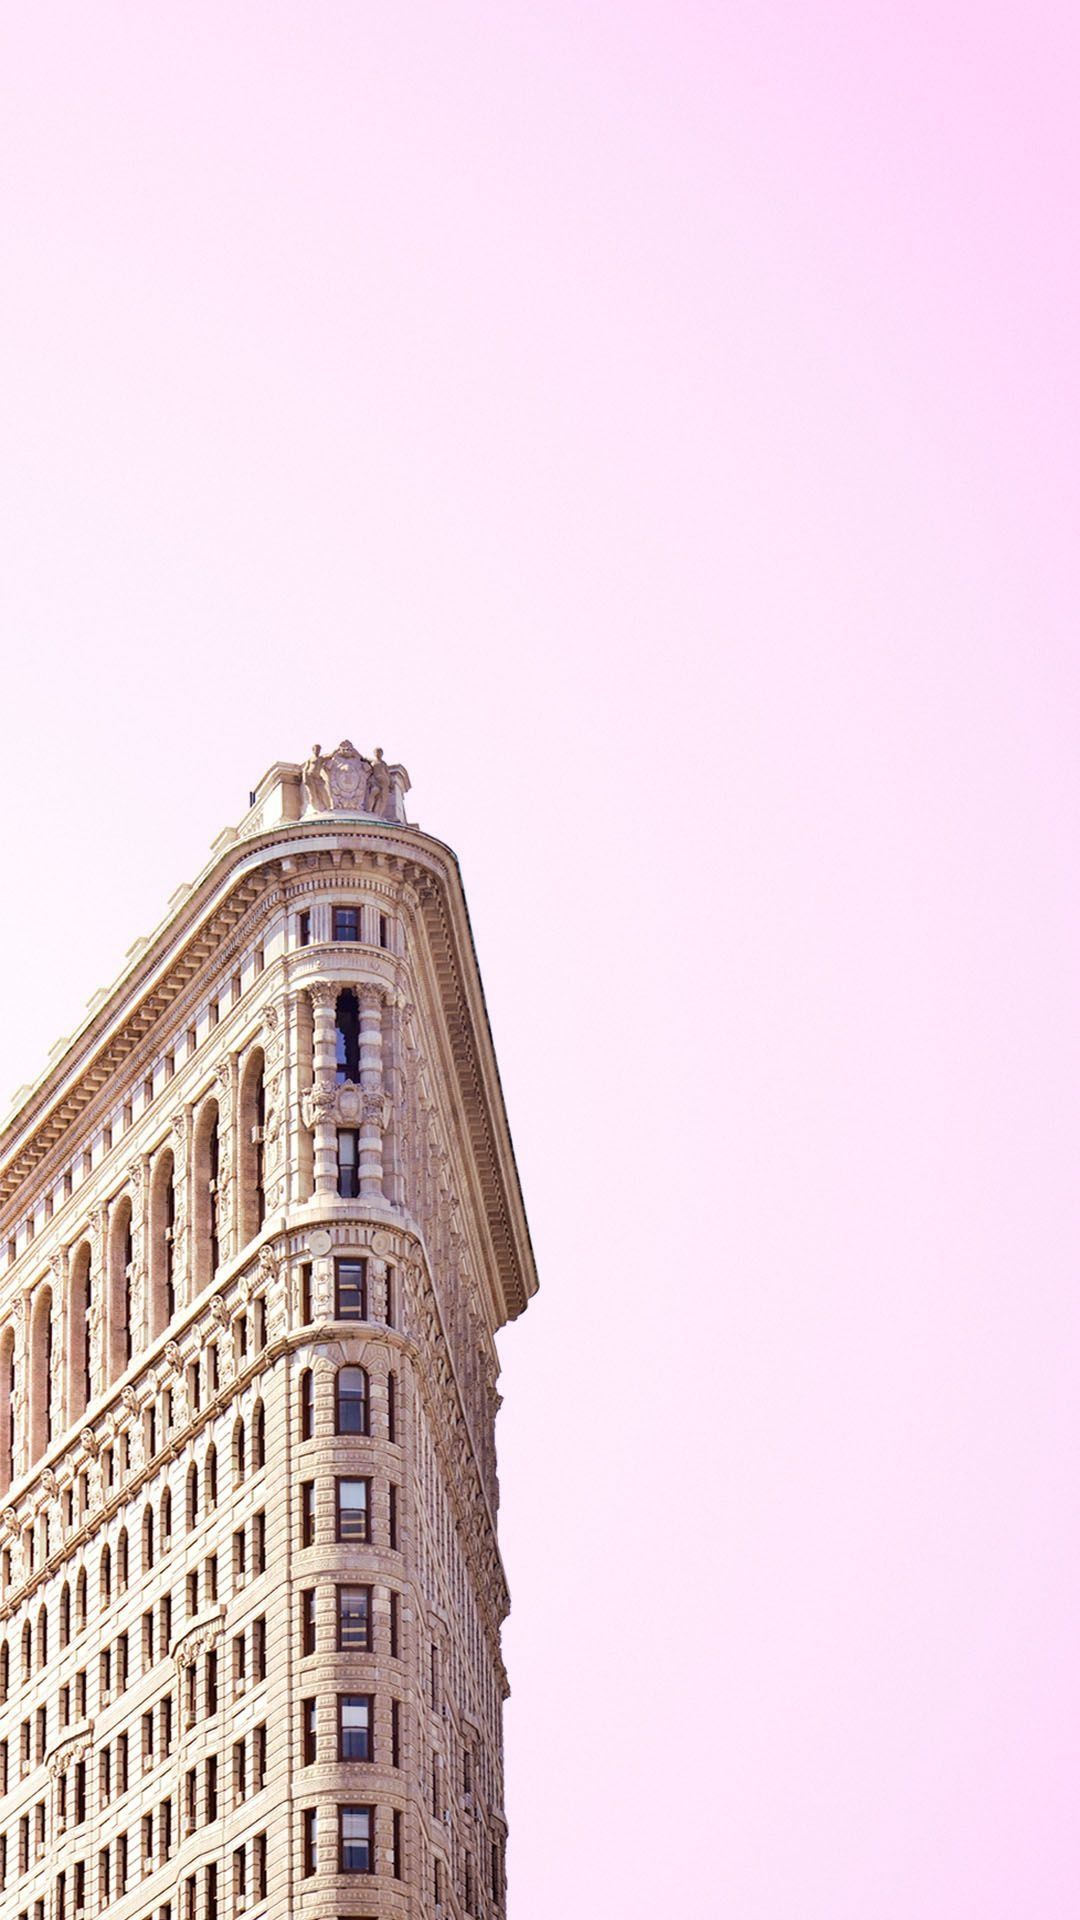 IPhone wallpaper of the top of the Flatiron Building in New York City - New York, pink